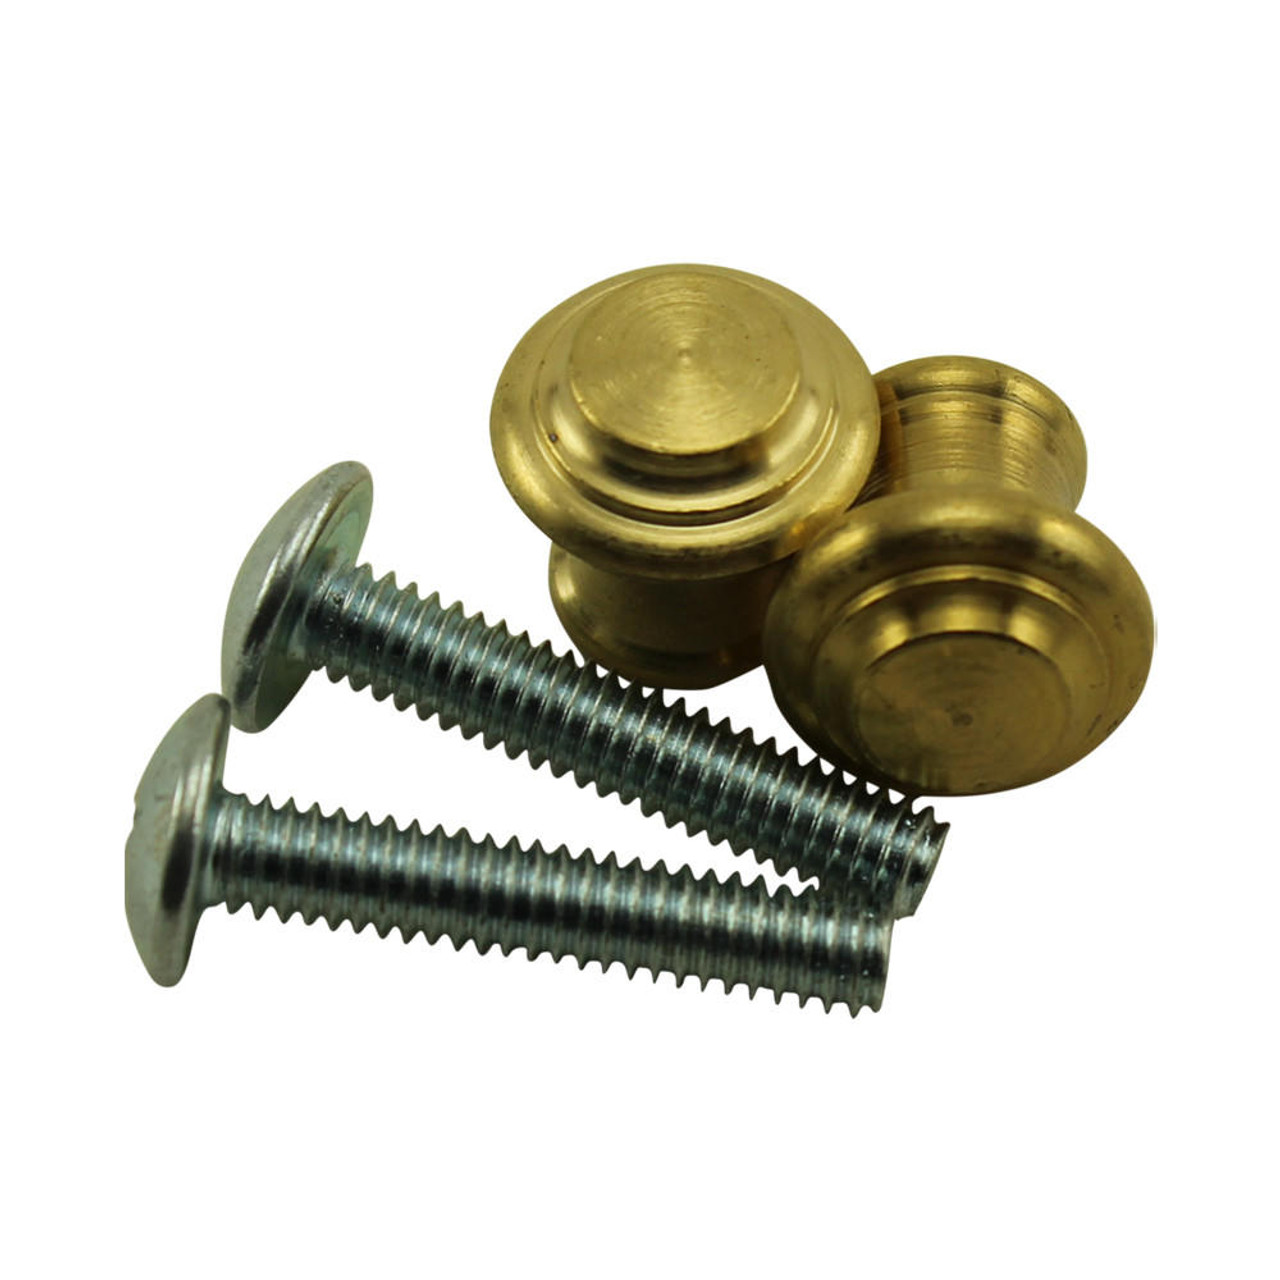 Buy Small Satin Brass Piano Desk Knobs - One Pair